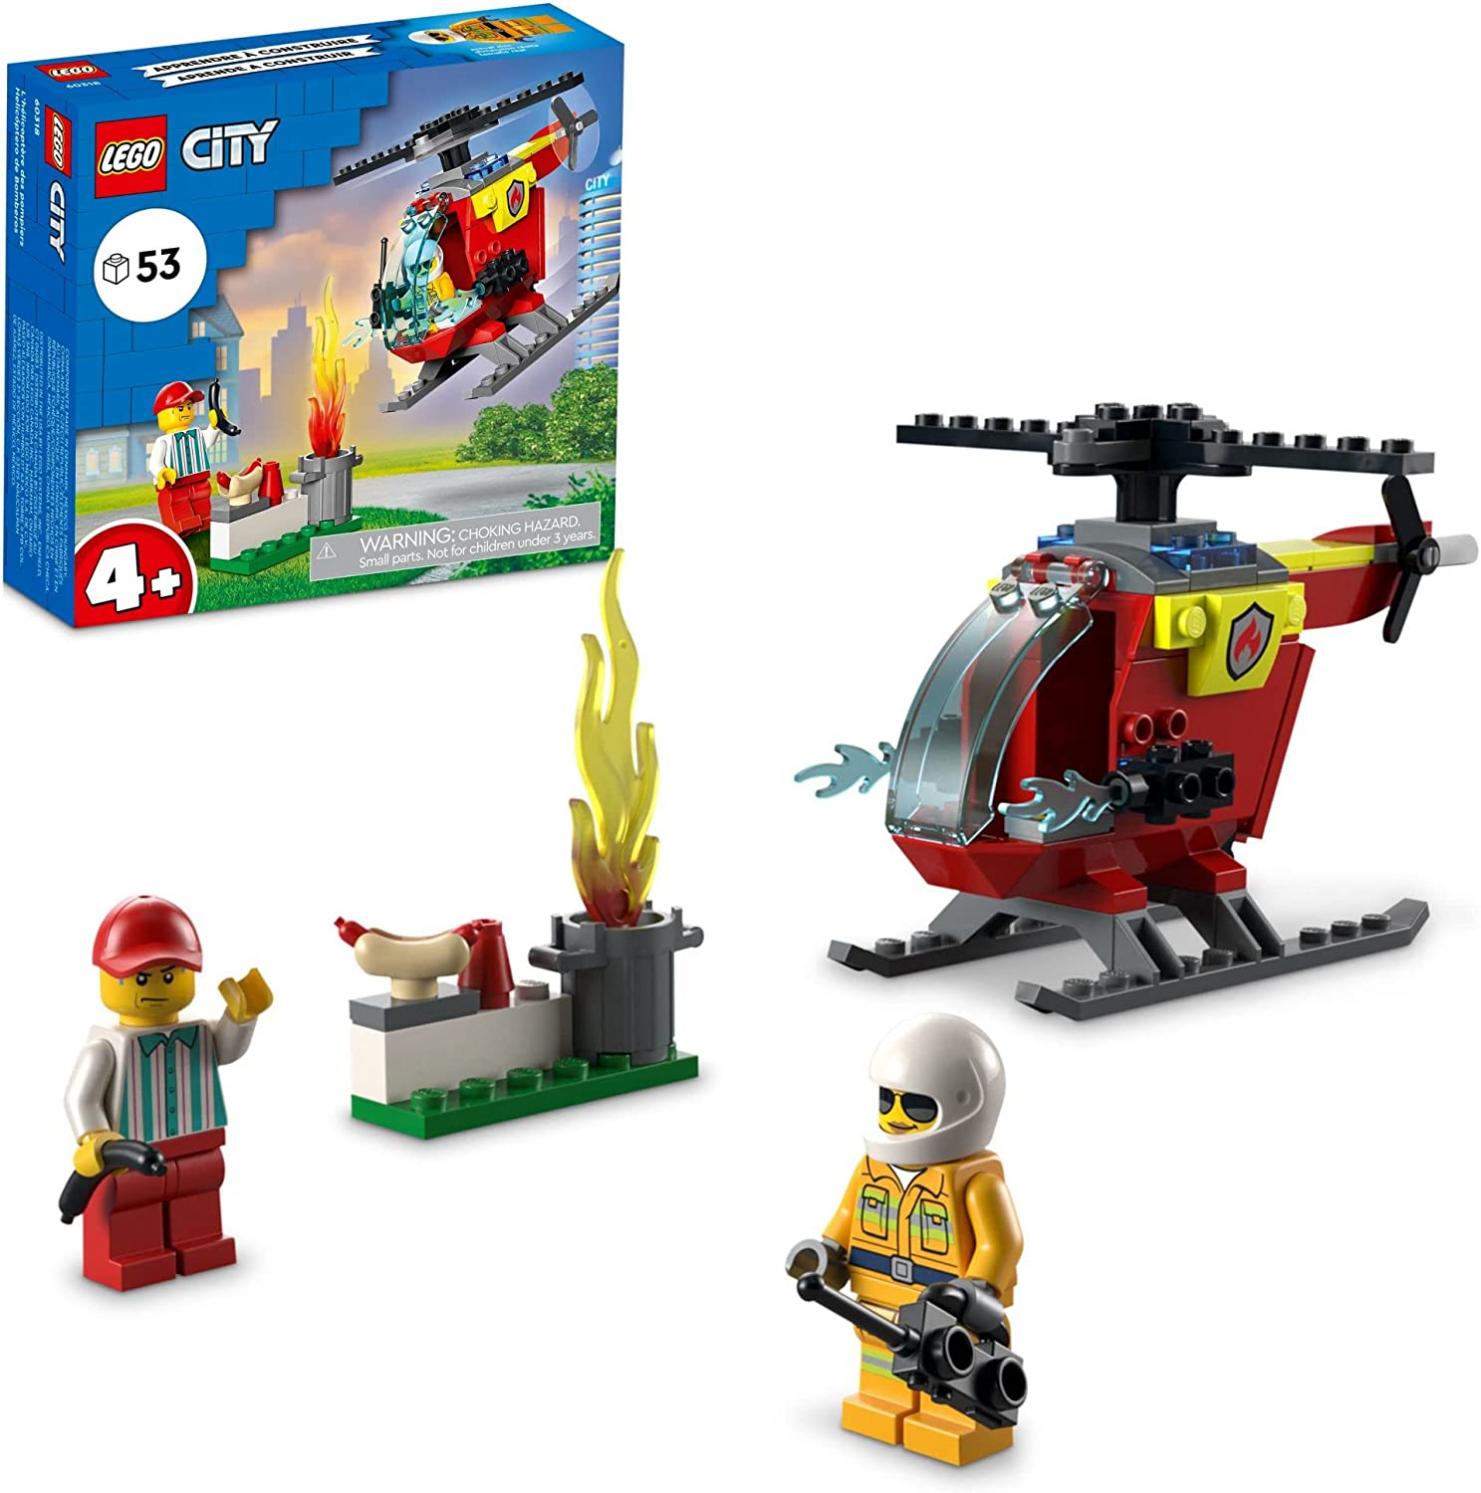 LEGO City Fire Helicopter 60318 Building Toy Set for Preschool Kids, Boys, and Girls Ages 4+ (53 Pieces)